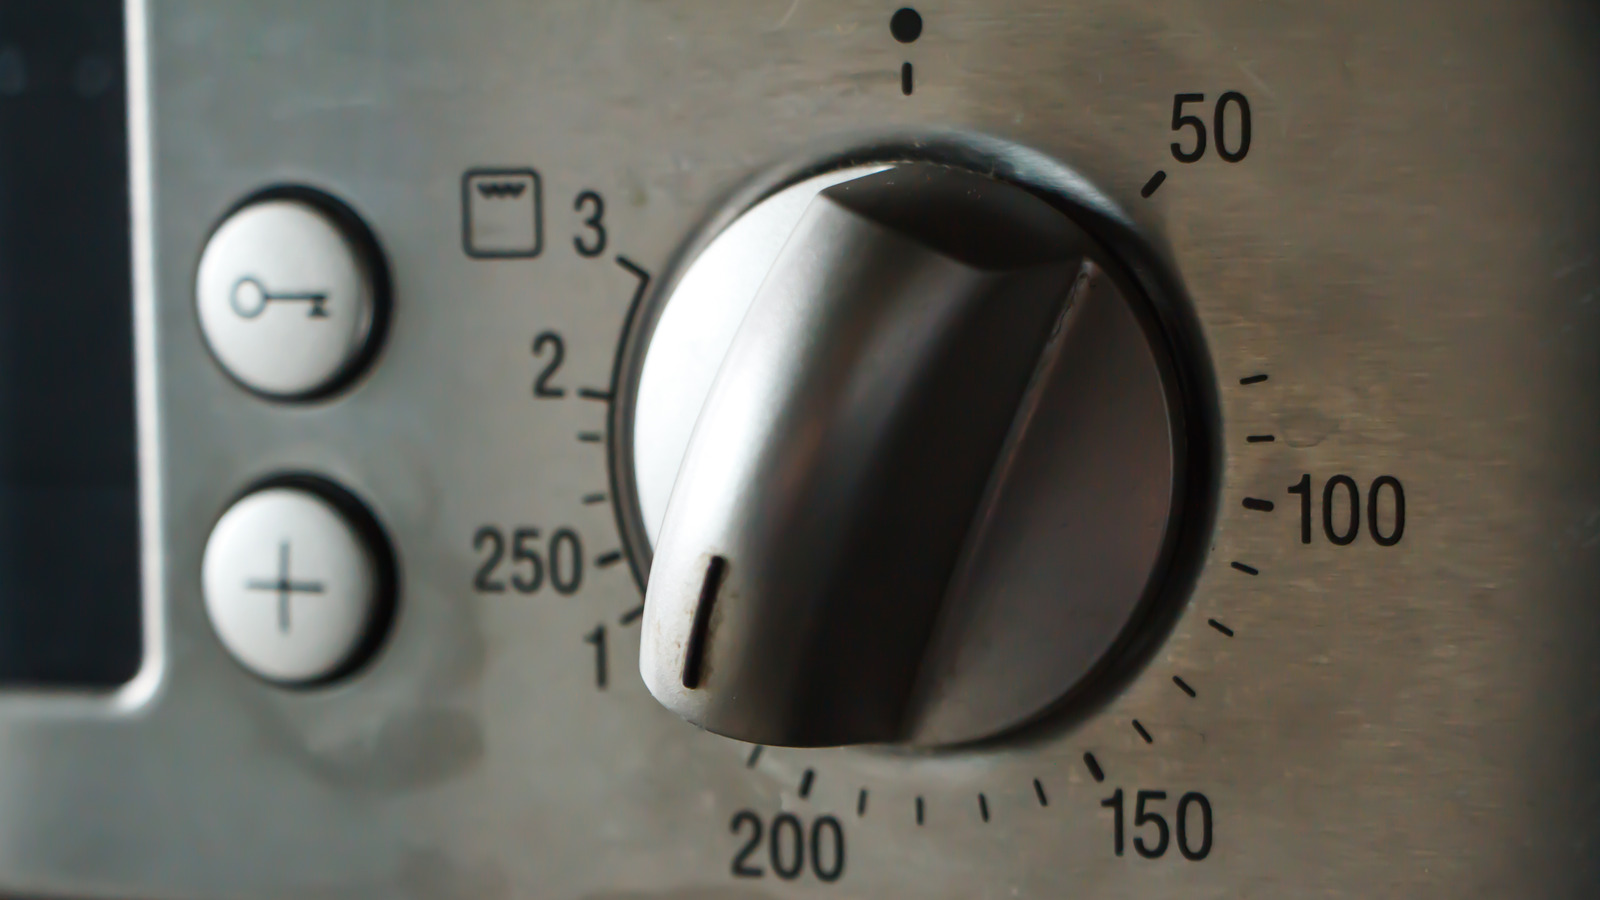 https://www.tastingtable.com/img/gallery/can-you-actually-trust-a-built-in-oven-thermometer/l-intro-1675702938.jpg